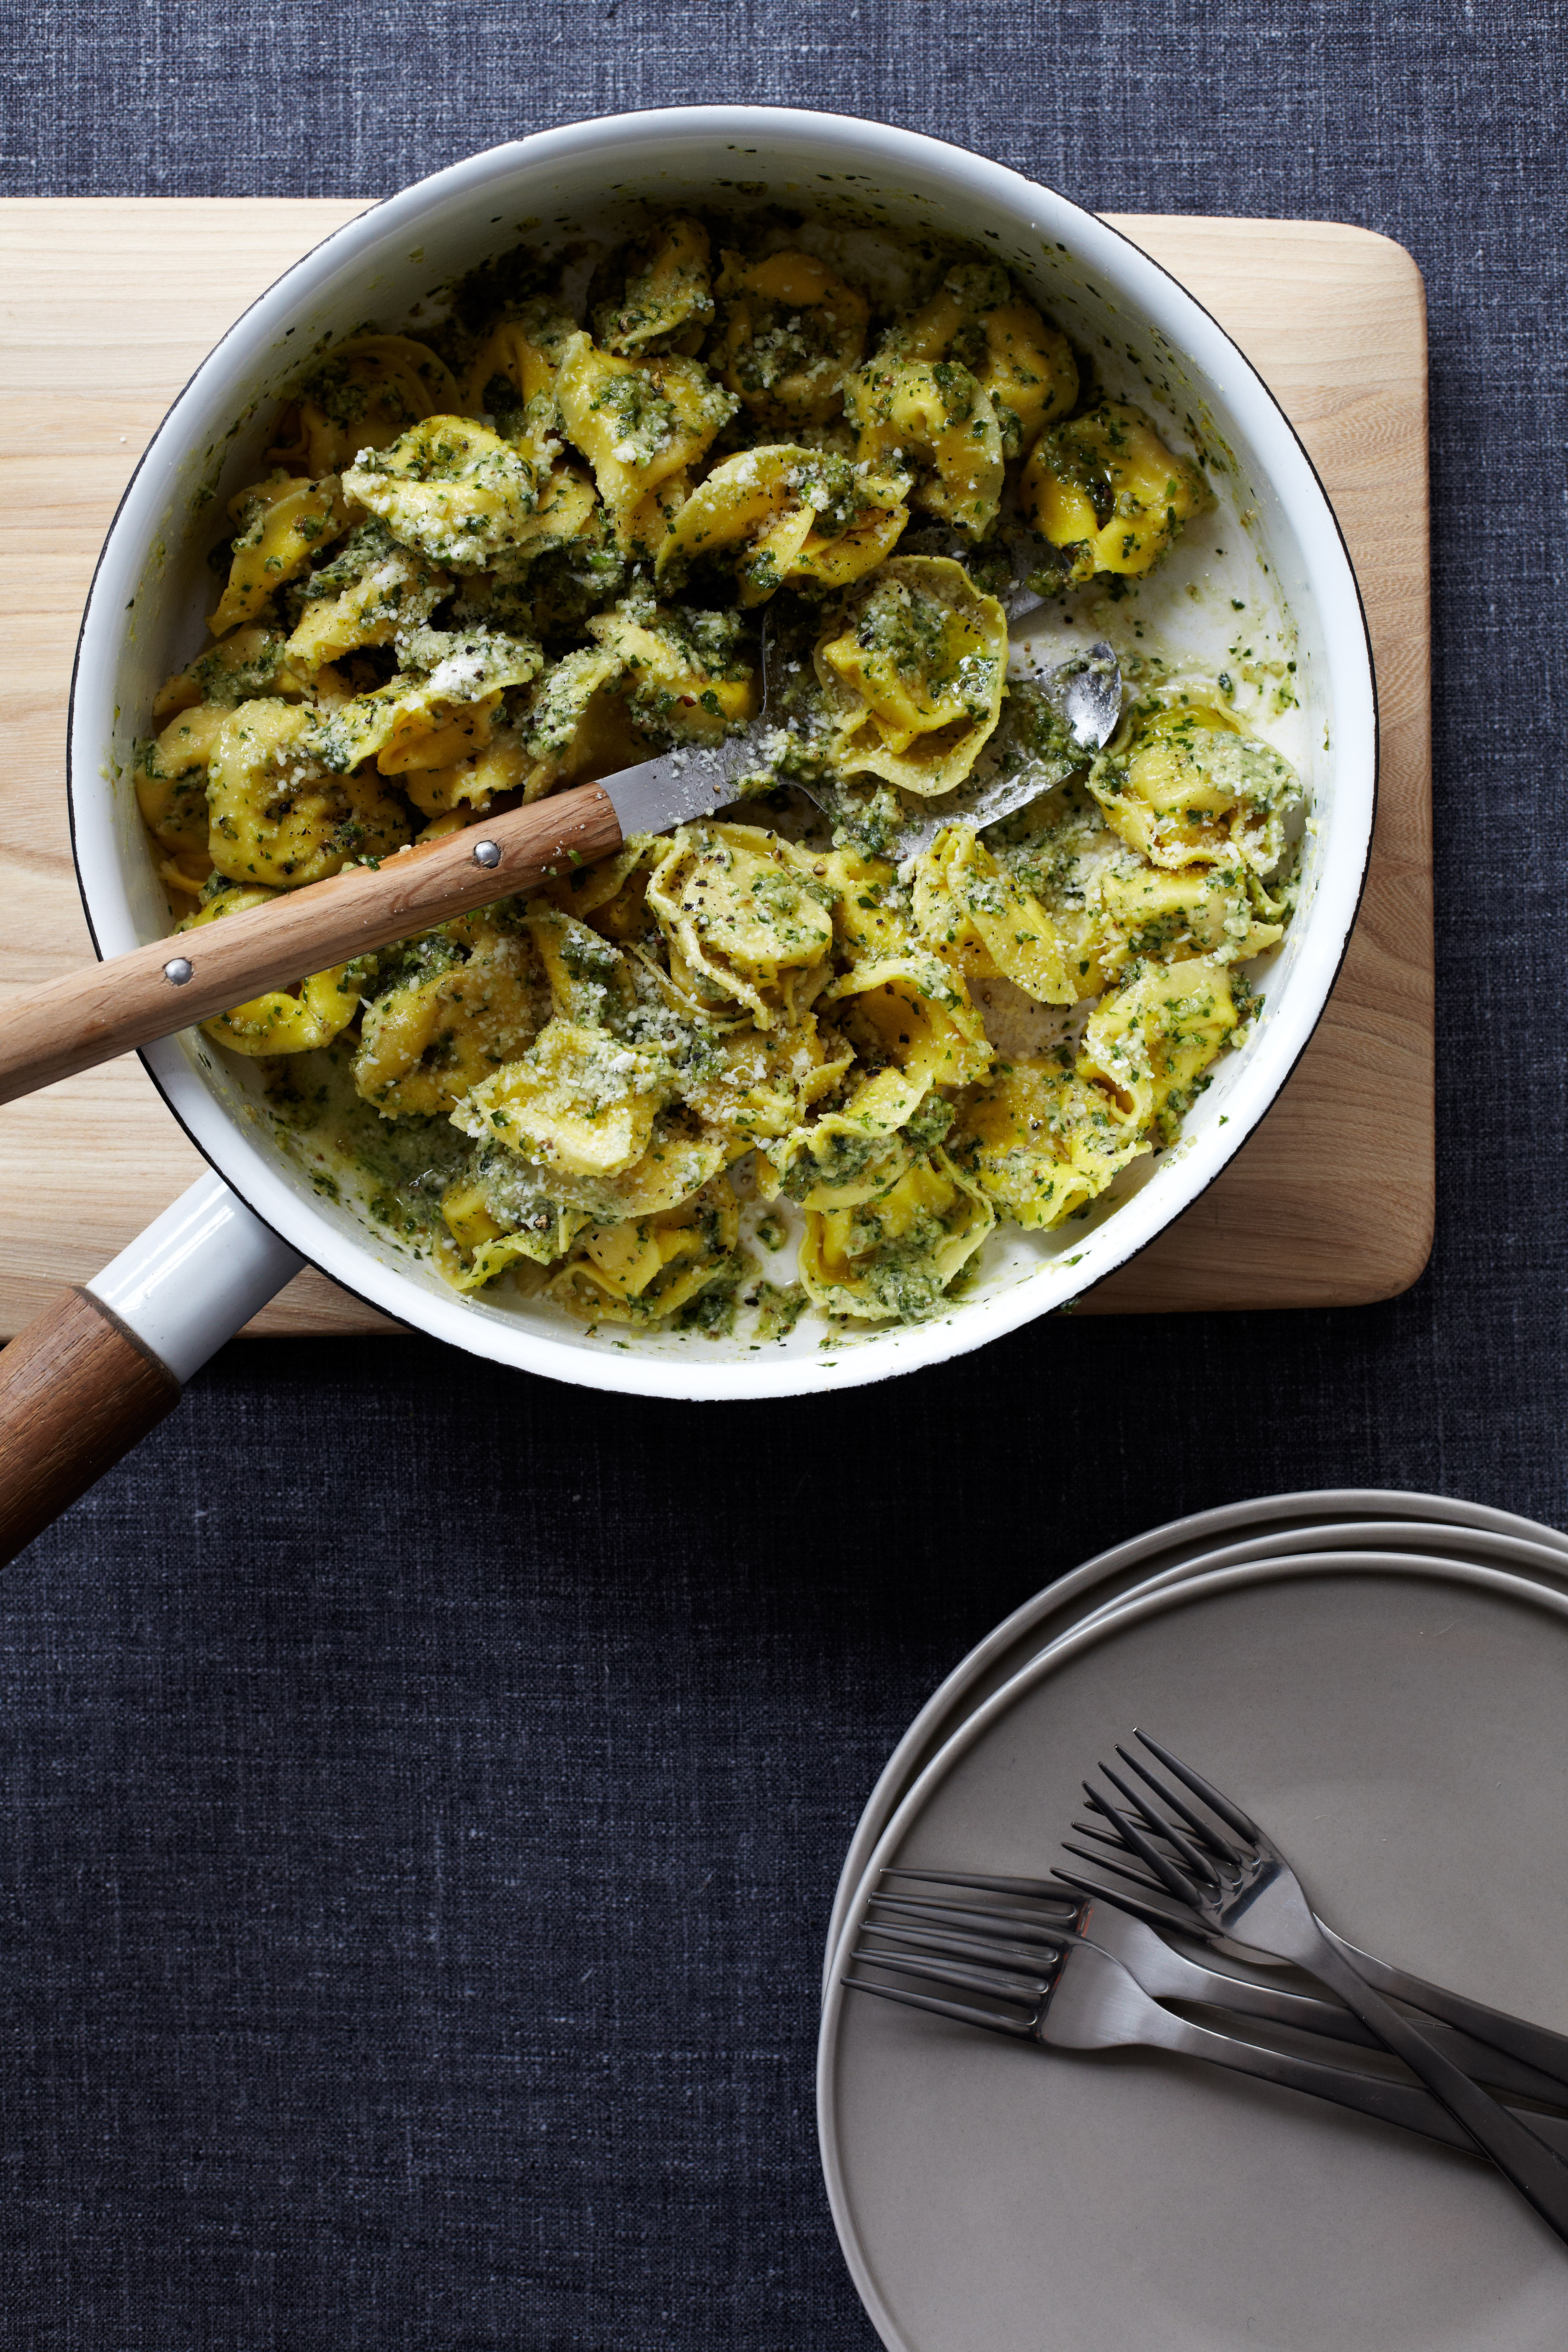 Cheese Tortellini with Walnut Pesto
                              Here's one of the quickest pesto sauces you'll come across. It's a perfect match for cheese tortellini, but you can use other tortellini such as mushroom or meat instead. The pesto is also great with just about any plain pasta.
                              Recipe